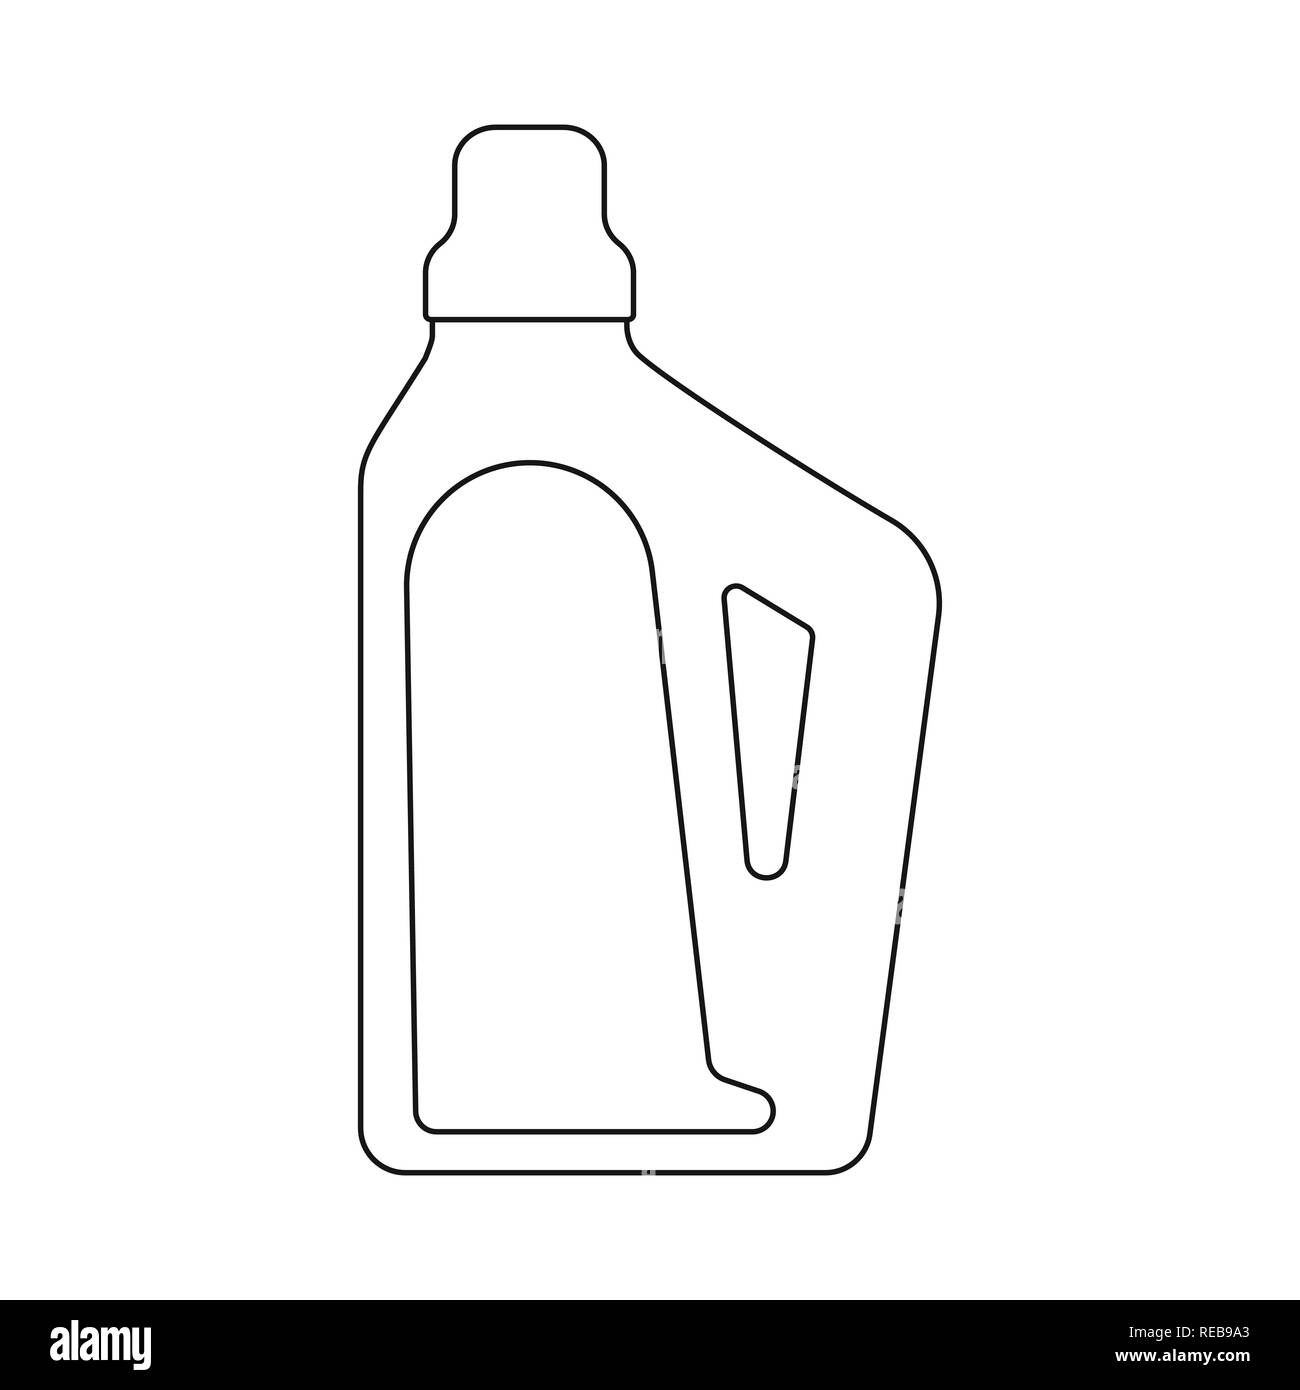 household,chemicals,organic,bottle,plastic,label,capacity,storage,container,packaging,sugarcane,cane,sugar,field,plant,plantation,farm,agriculture,sucrose,technology,set,vector,icon,illustration,isolated,collection,design,element,graphic,sign,outline,line, Vector Vectors , Stock Vector